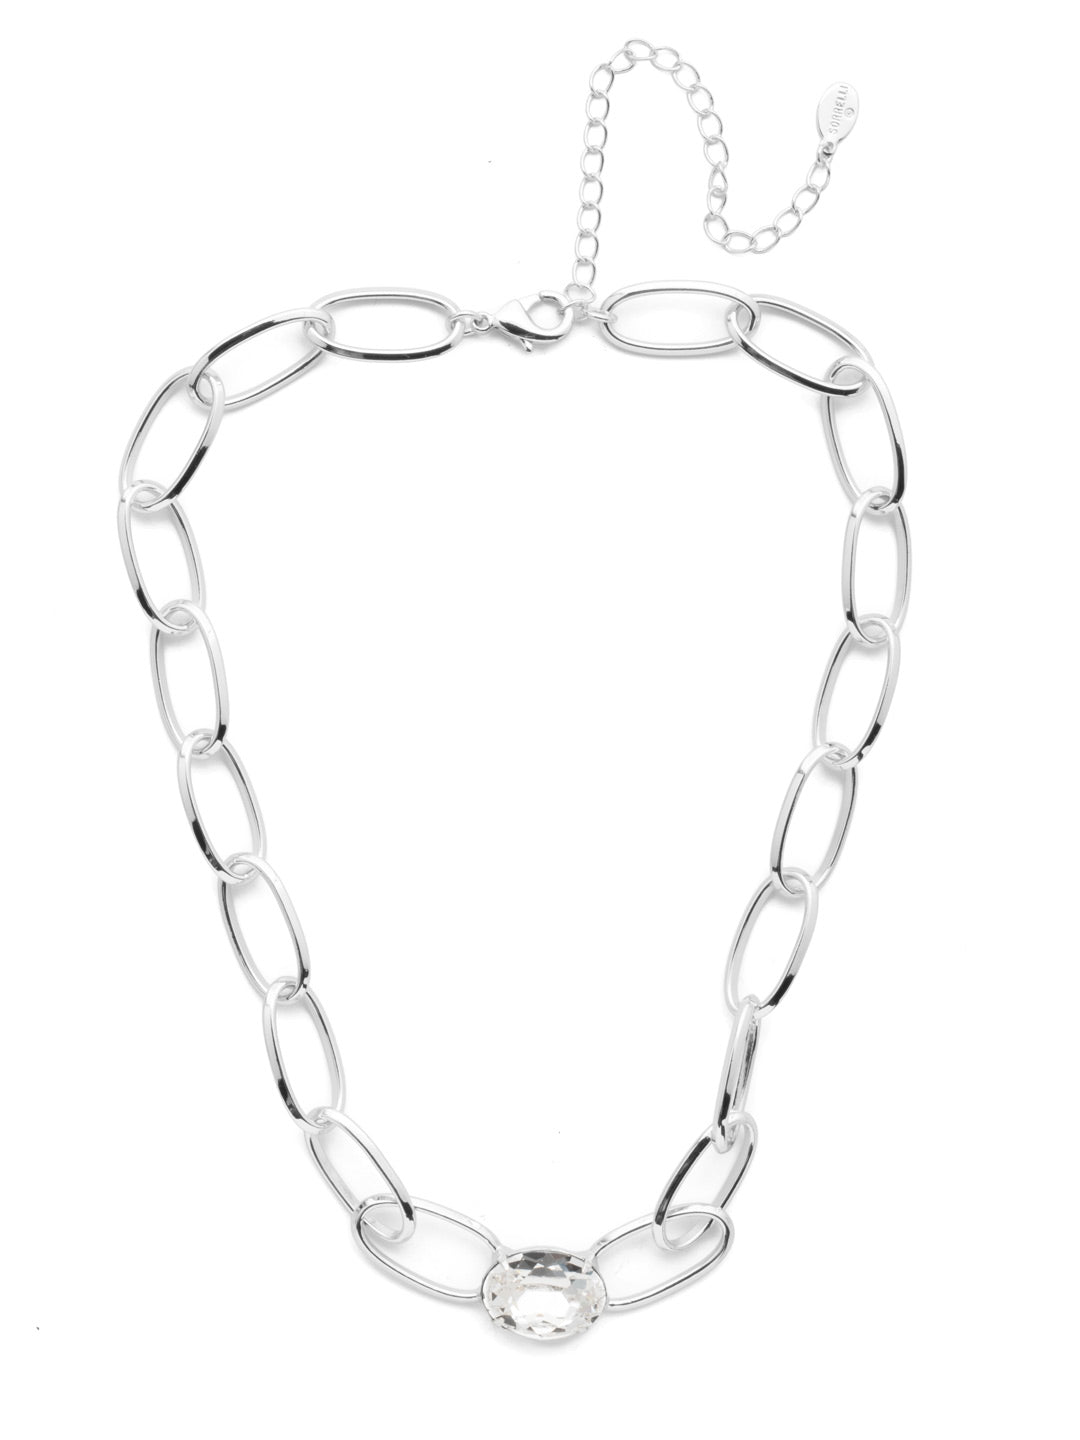 Karisma Tennis Necklace - 4NES12RHCRY - <p>The Karisma Tennis Necklace is airy and light with its open metallic links, all the while demanding attention from a seriously sparkling crystal taking center stage. From Sorrelli's Crystal collection in our Palladium Silver-tone finish.</p>